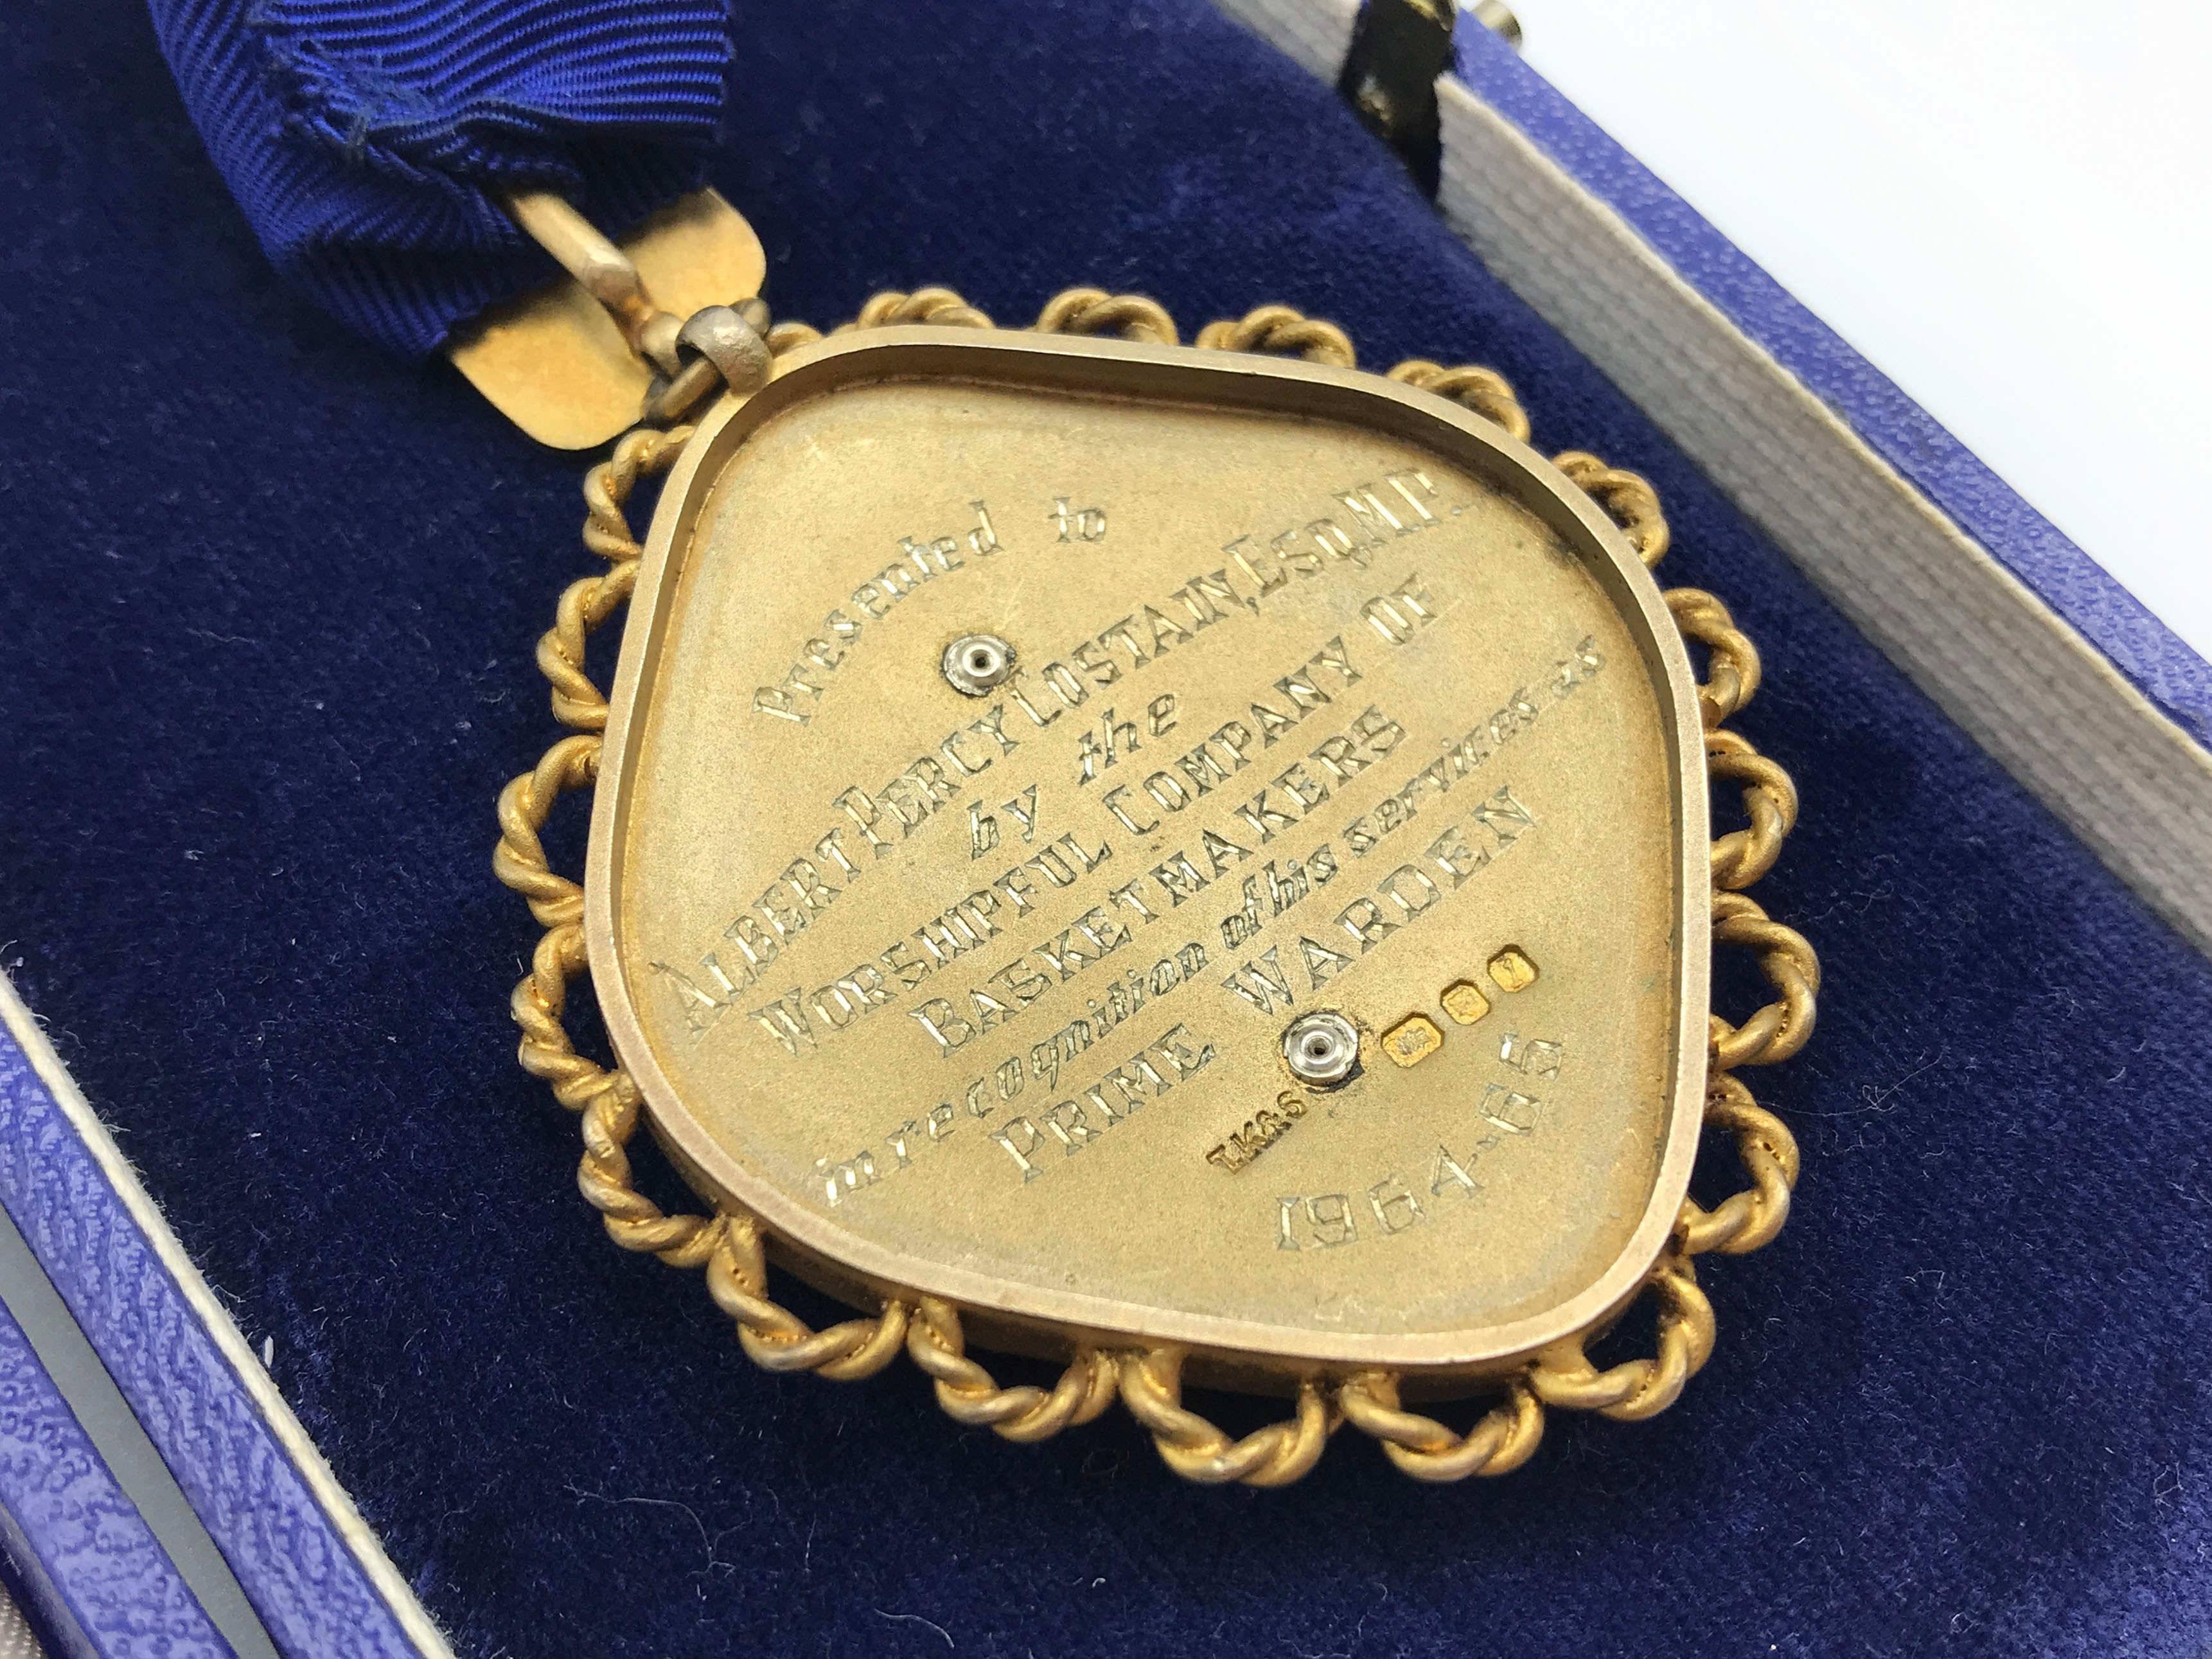 THE WORSHIPFUL COMPANY OF BASKETMAKERS HALLMARKED SILVER JEWEL / MEDAL WITH COLLAR - Image 3 of 5